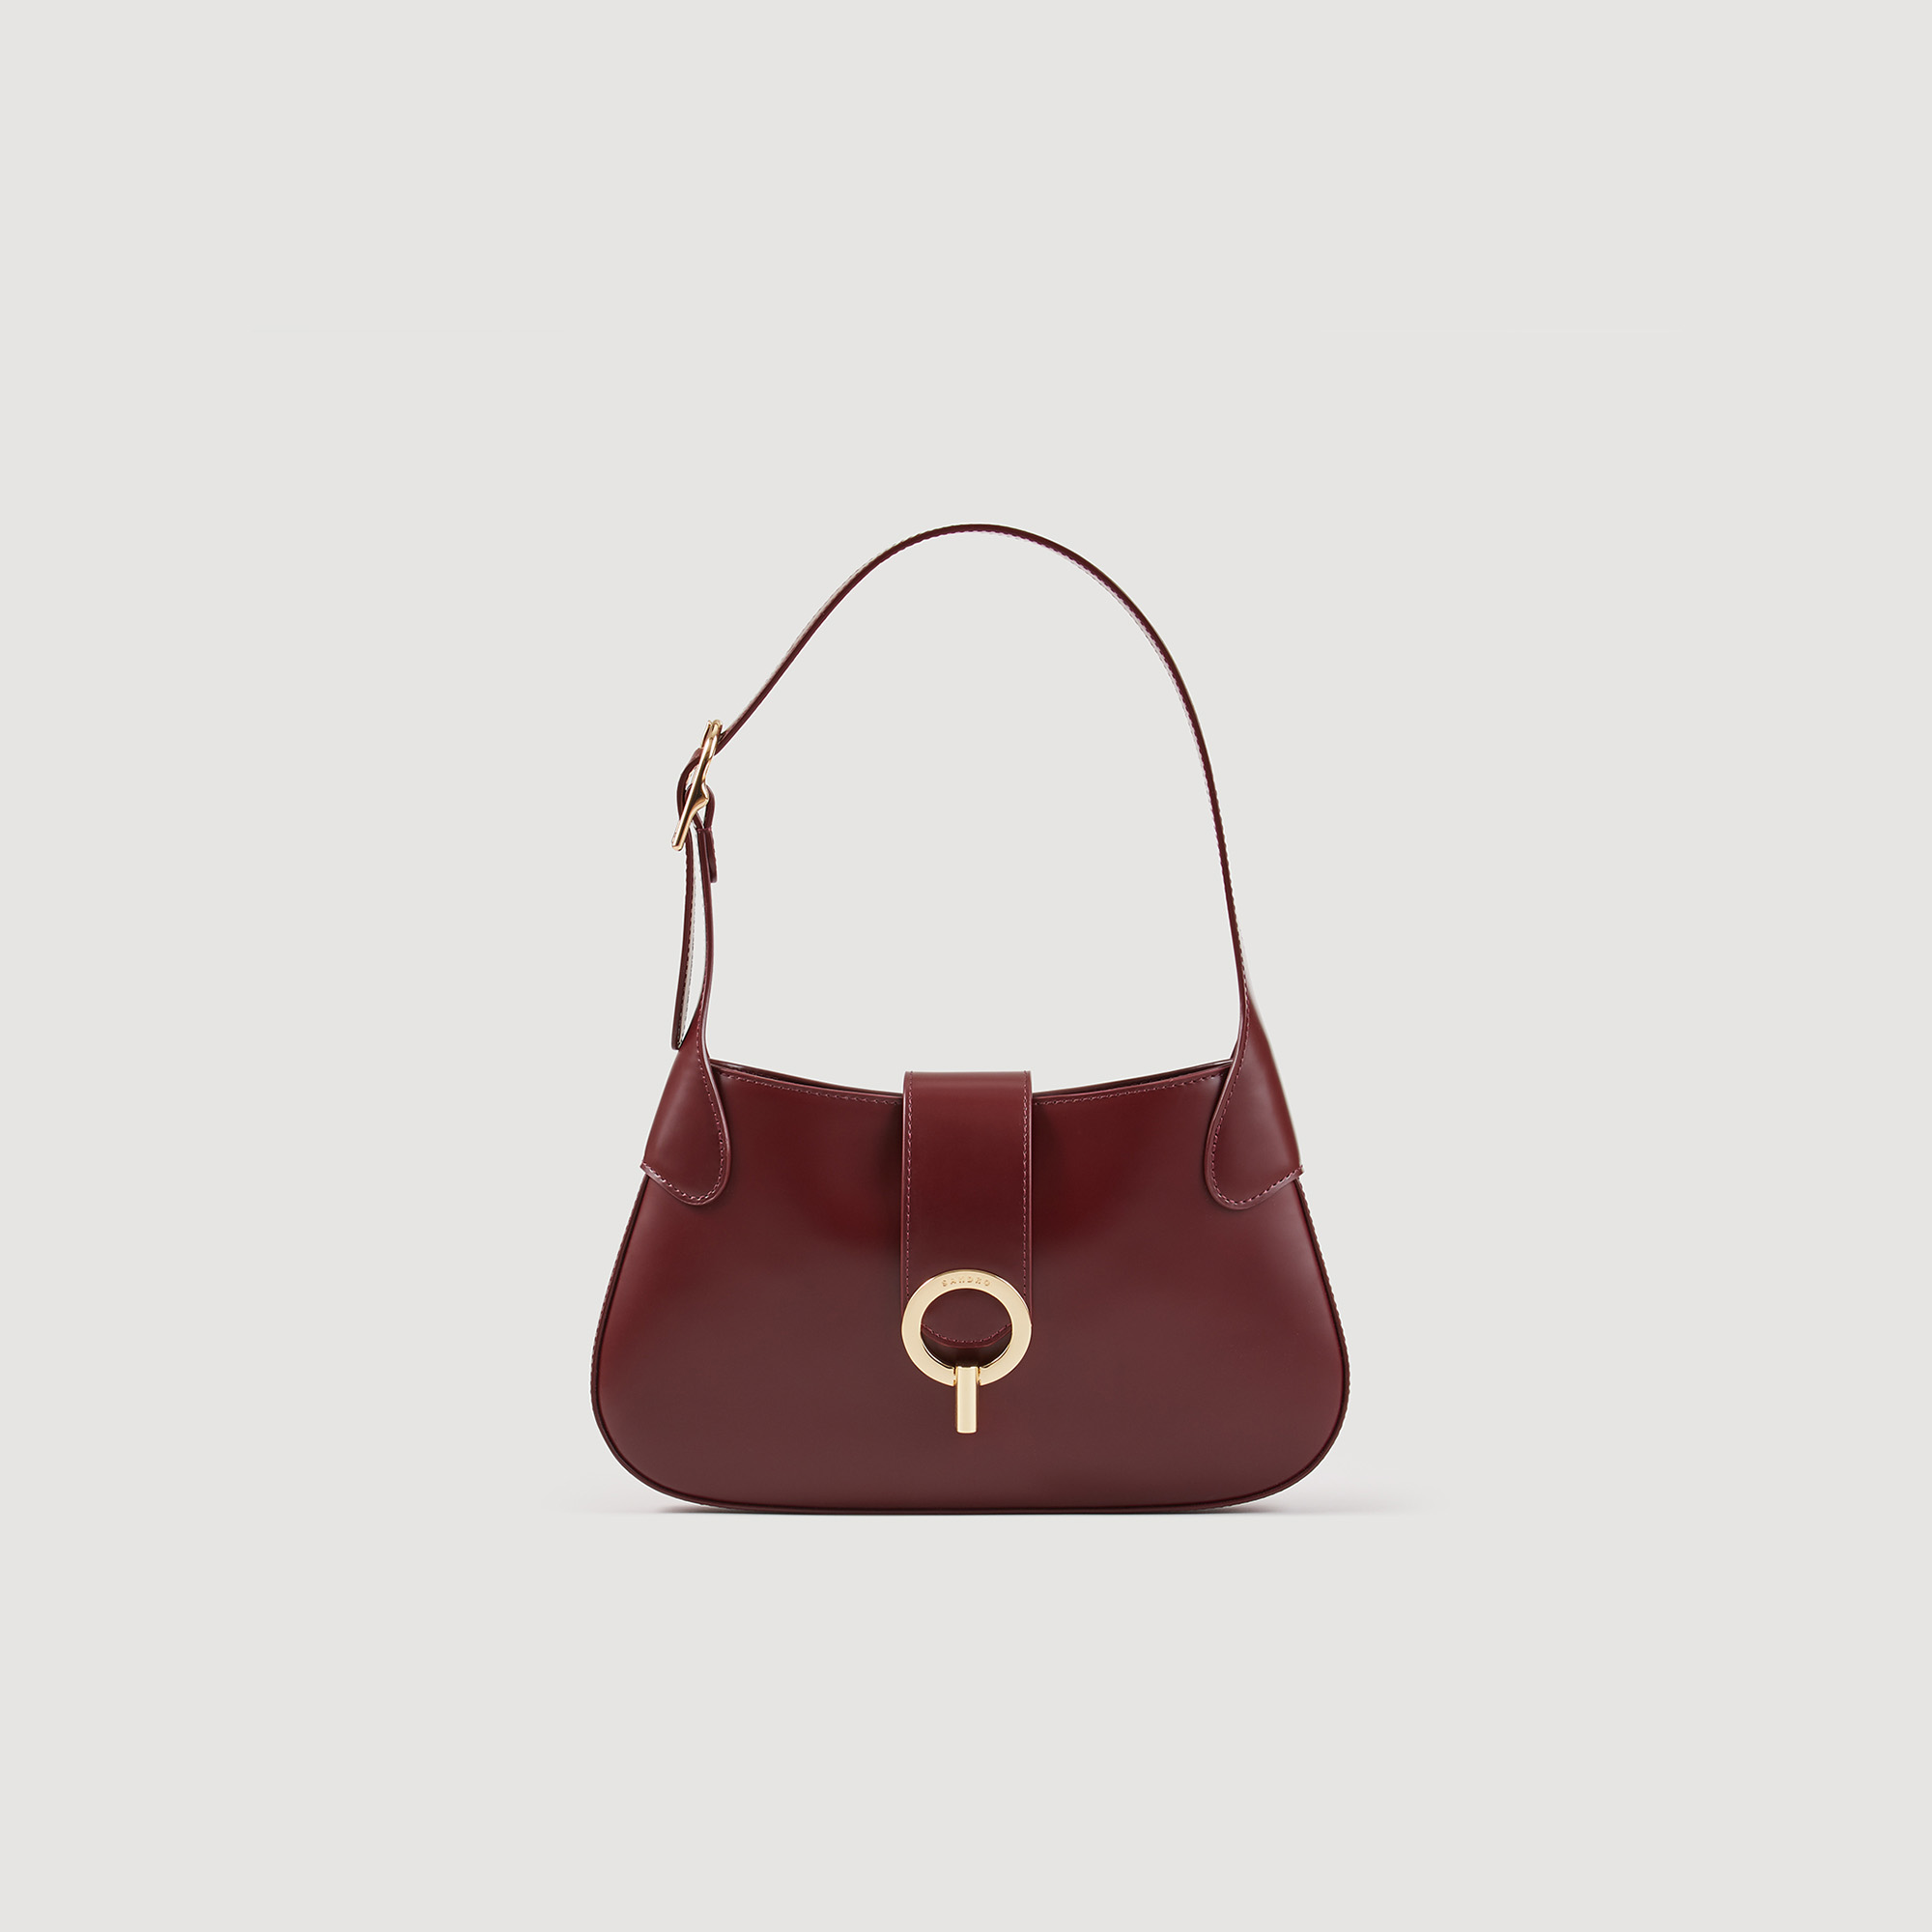 Sandro cotton Leather: Smooth leather baguette shoulder bag with a signature clasp and a metal buckle handle